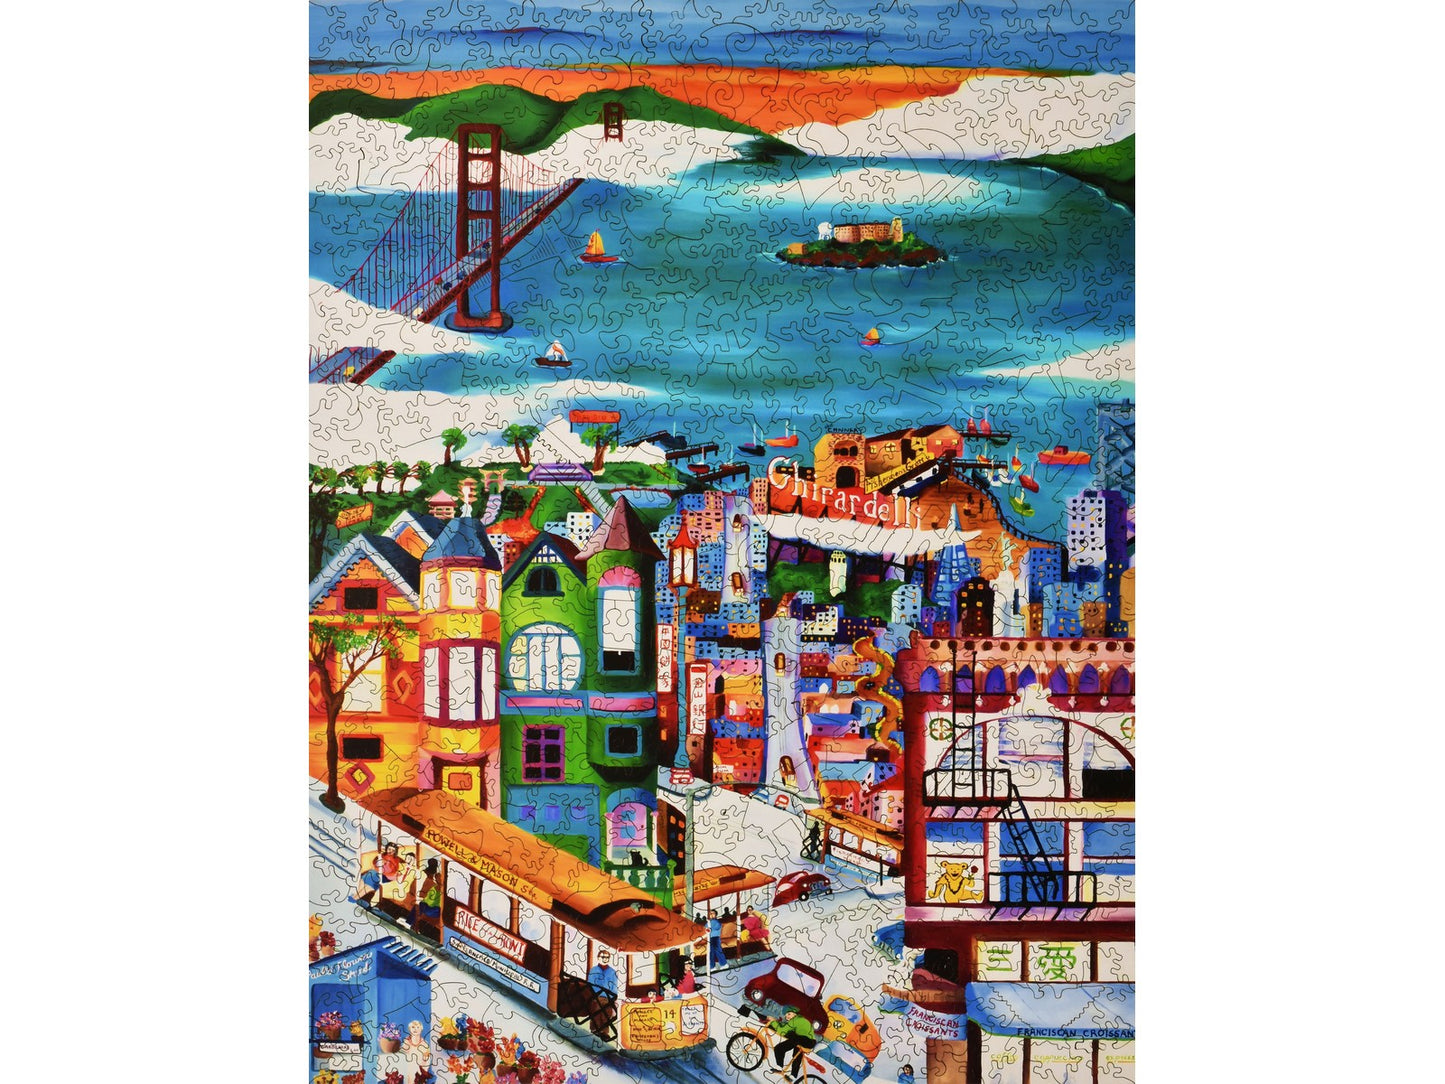 The front of the puzzle, Hills of San Francisco, which shows a city scene with the bay and bridge in the background.